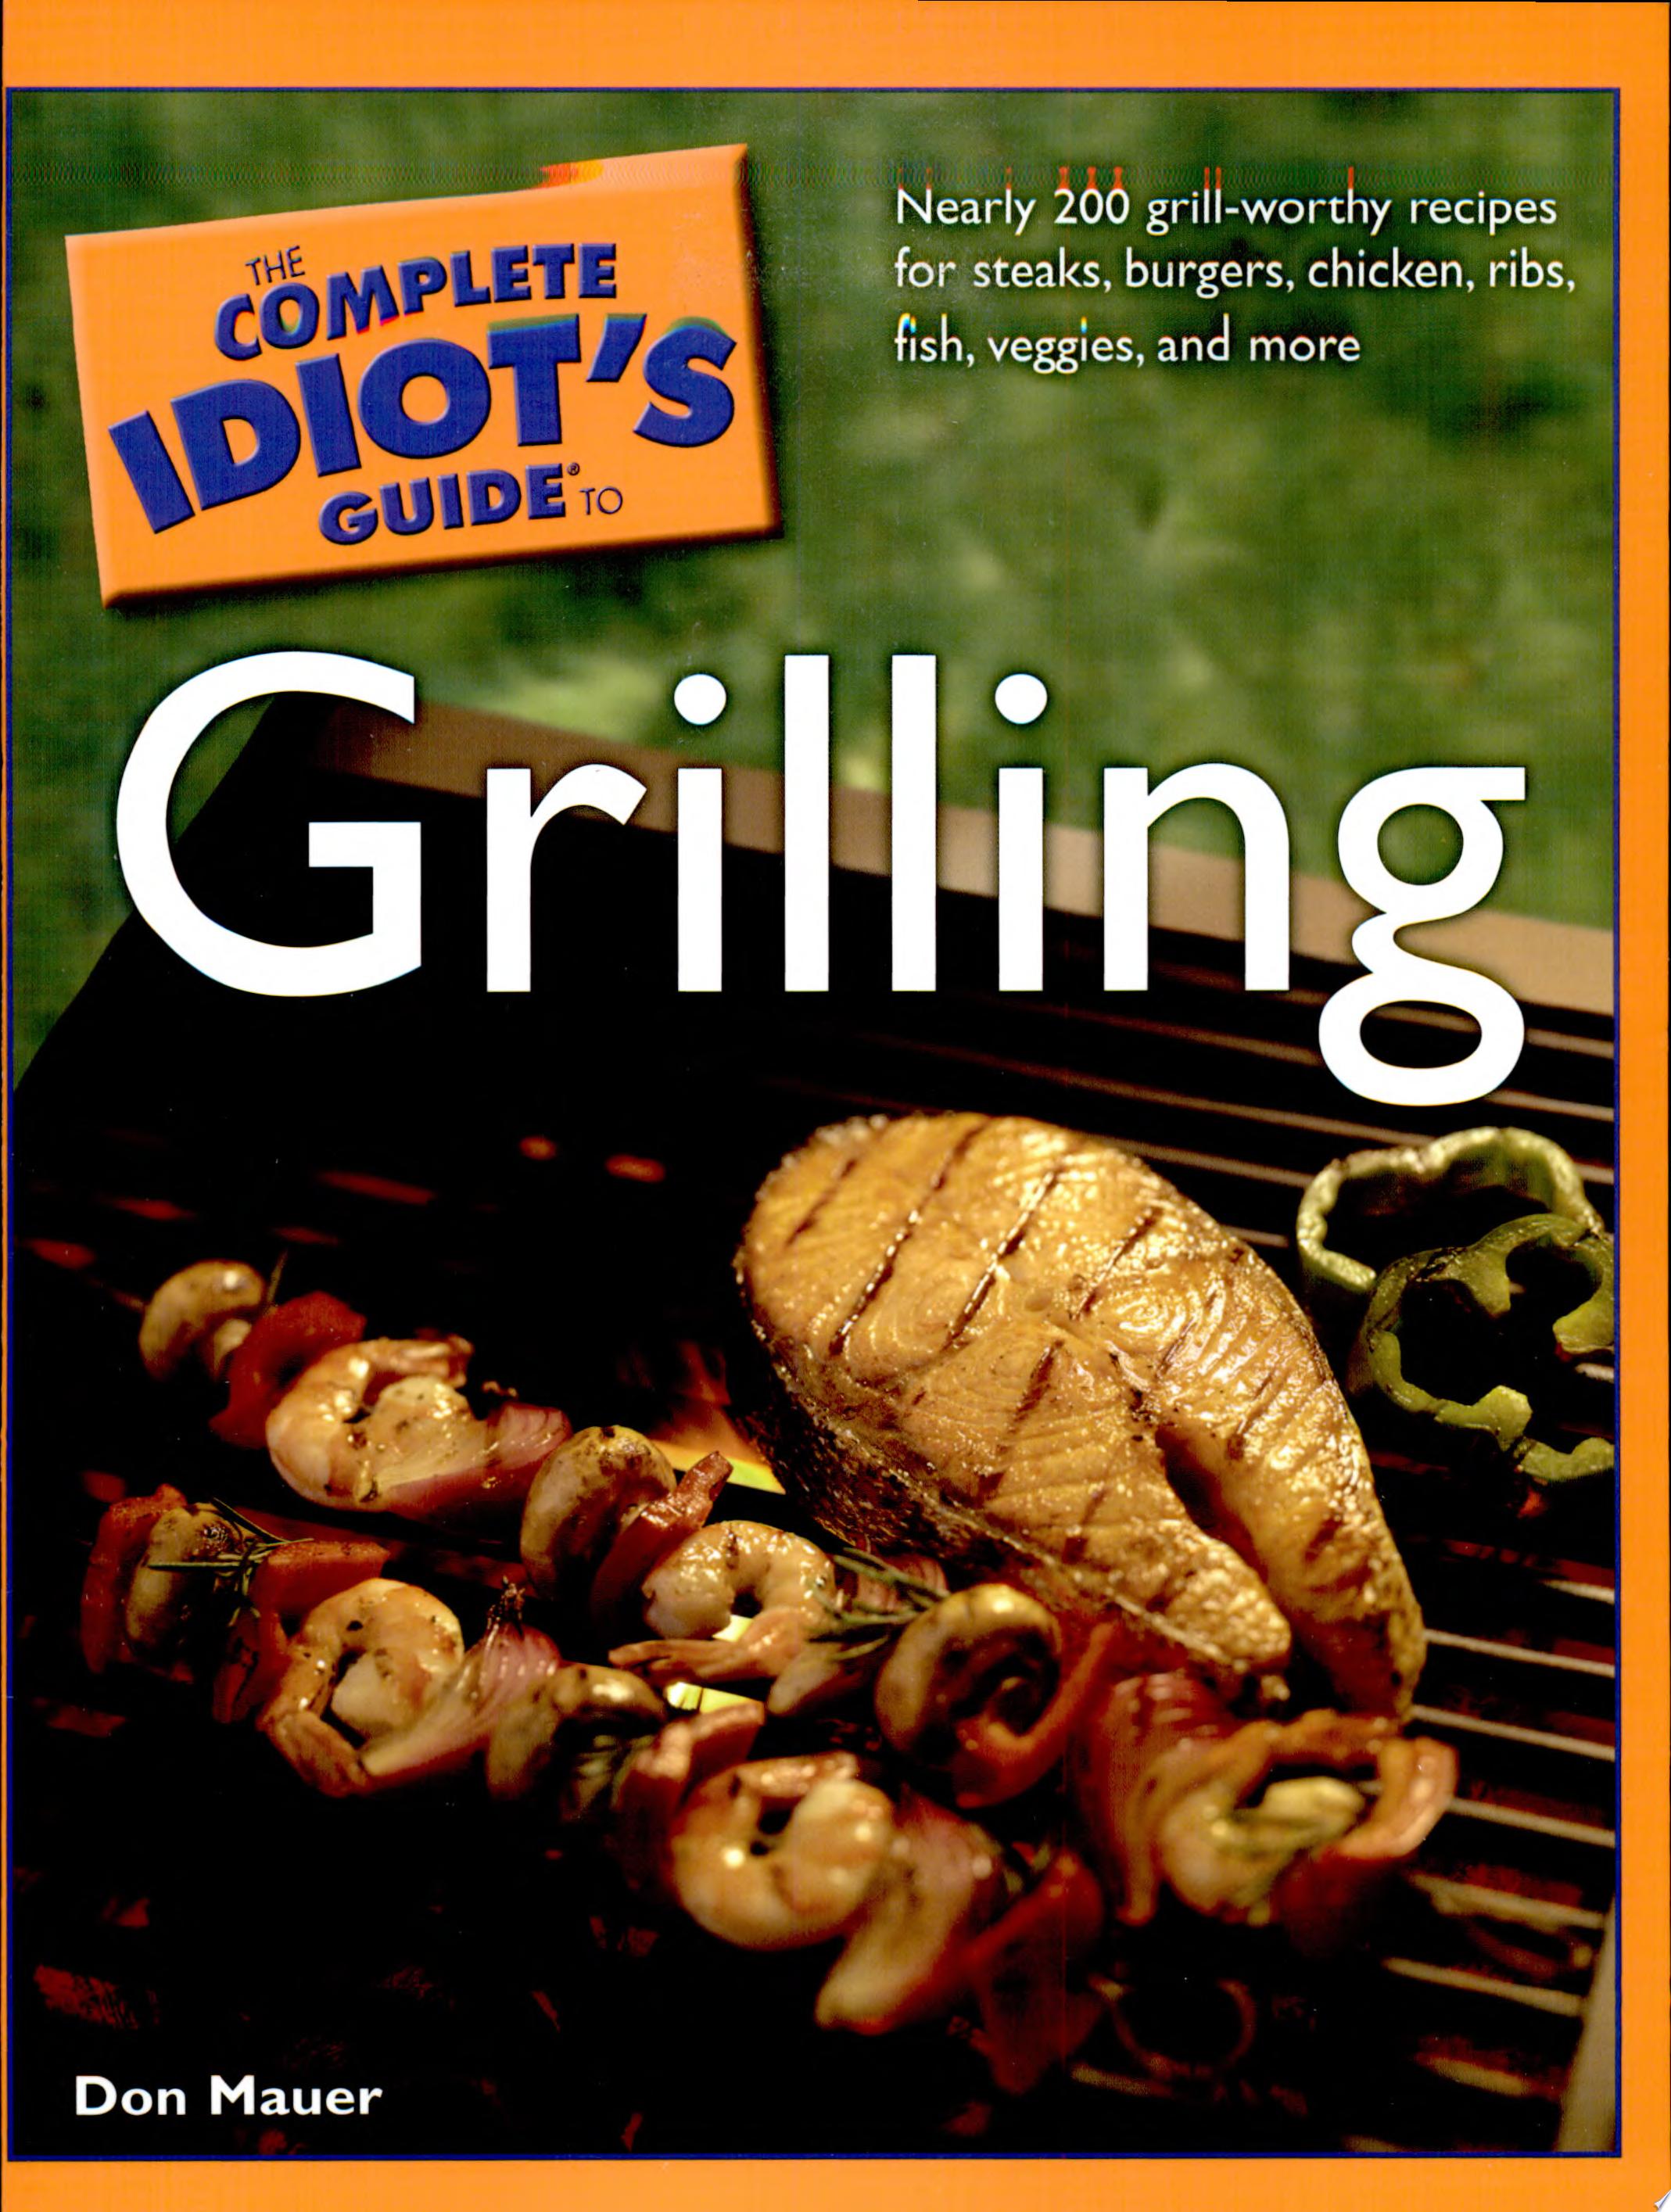 Image for "The Complete Idiot's Guide to Grilling"